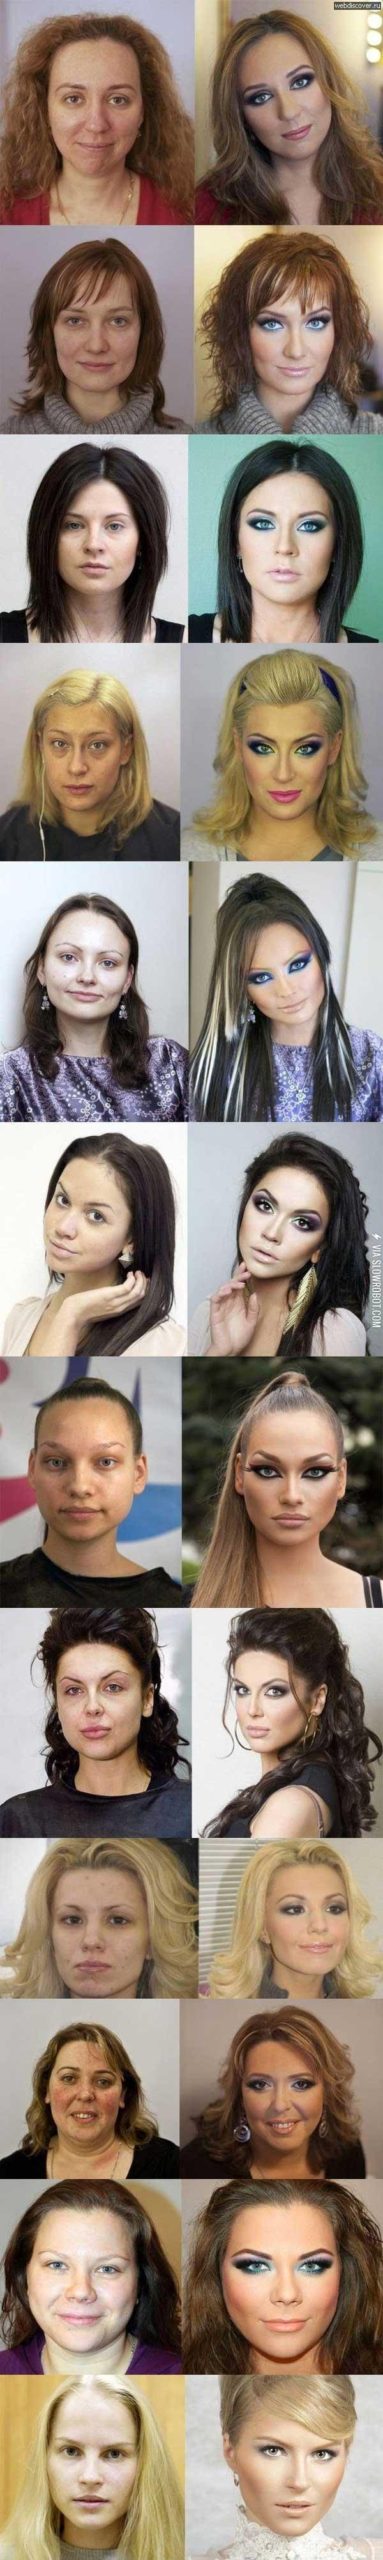 The+power+of+makeup.